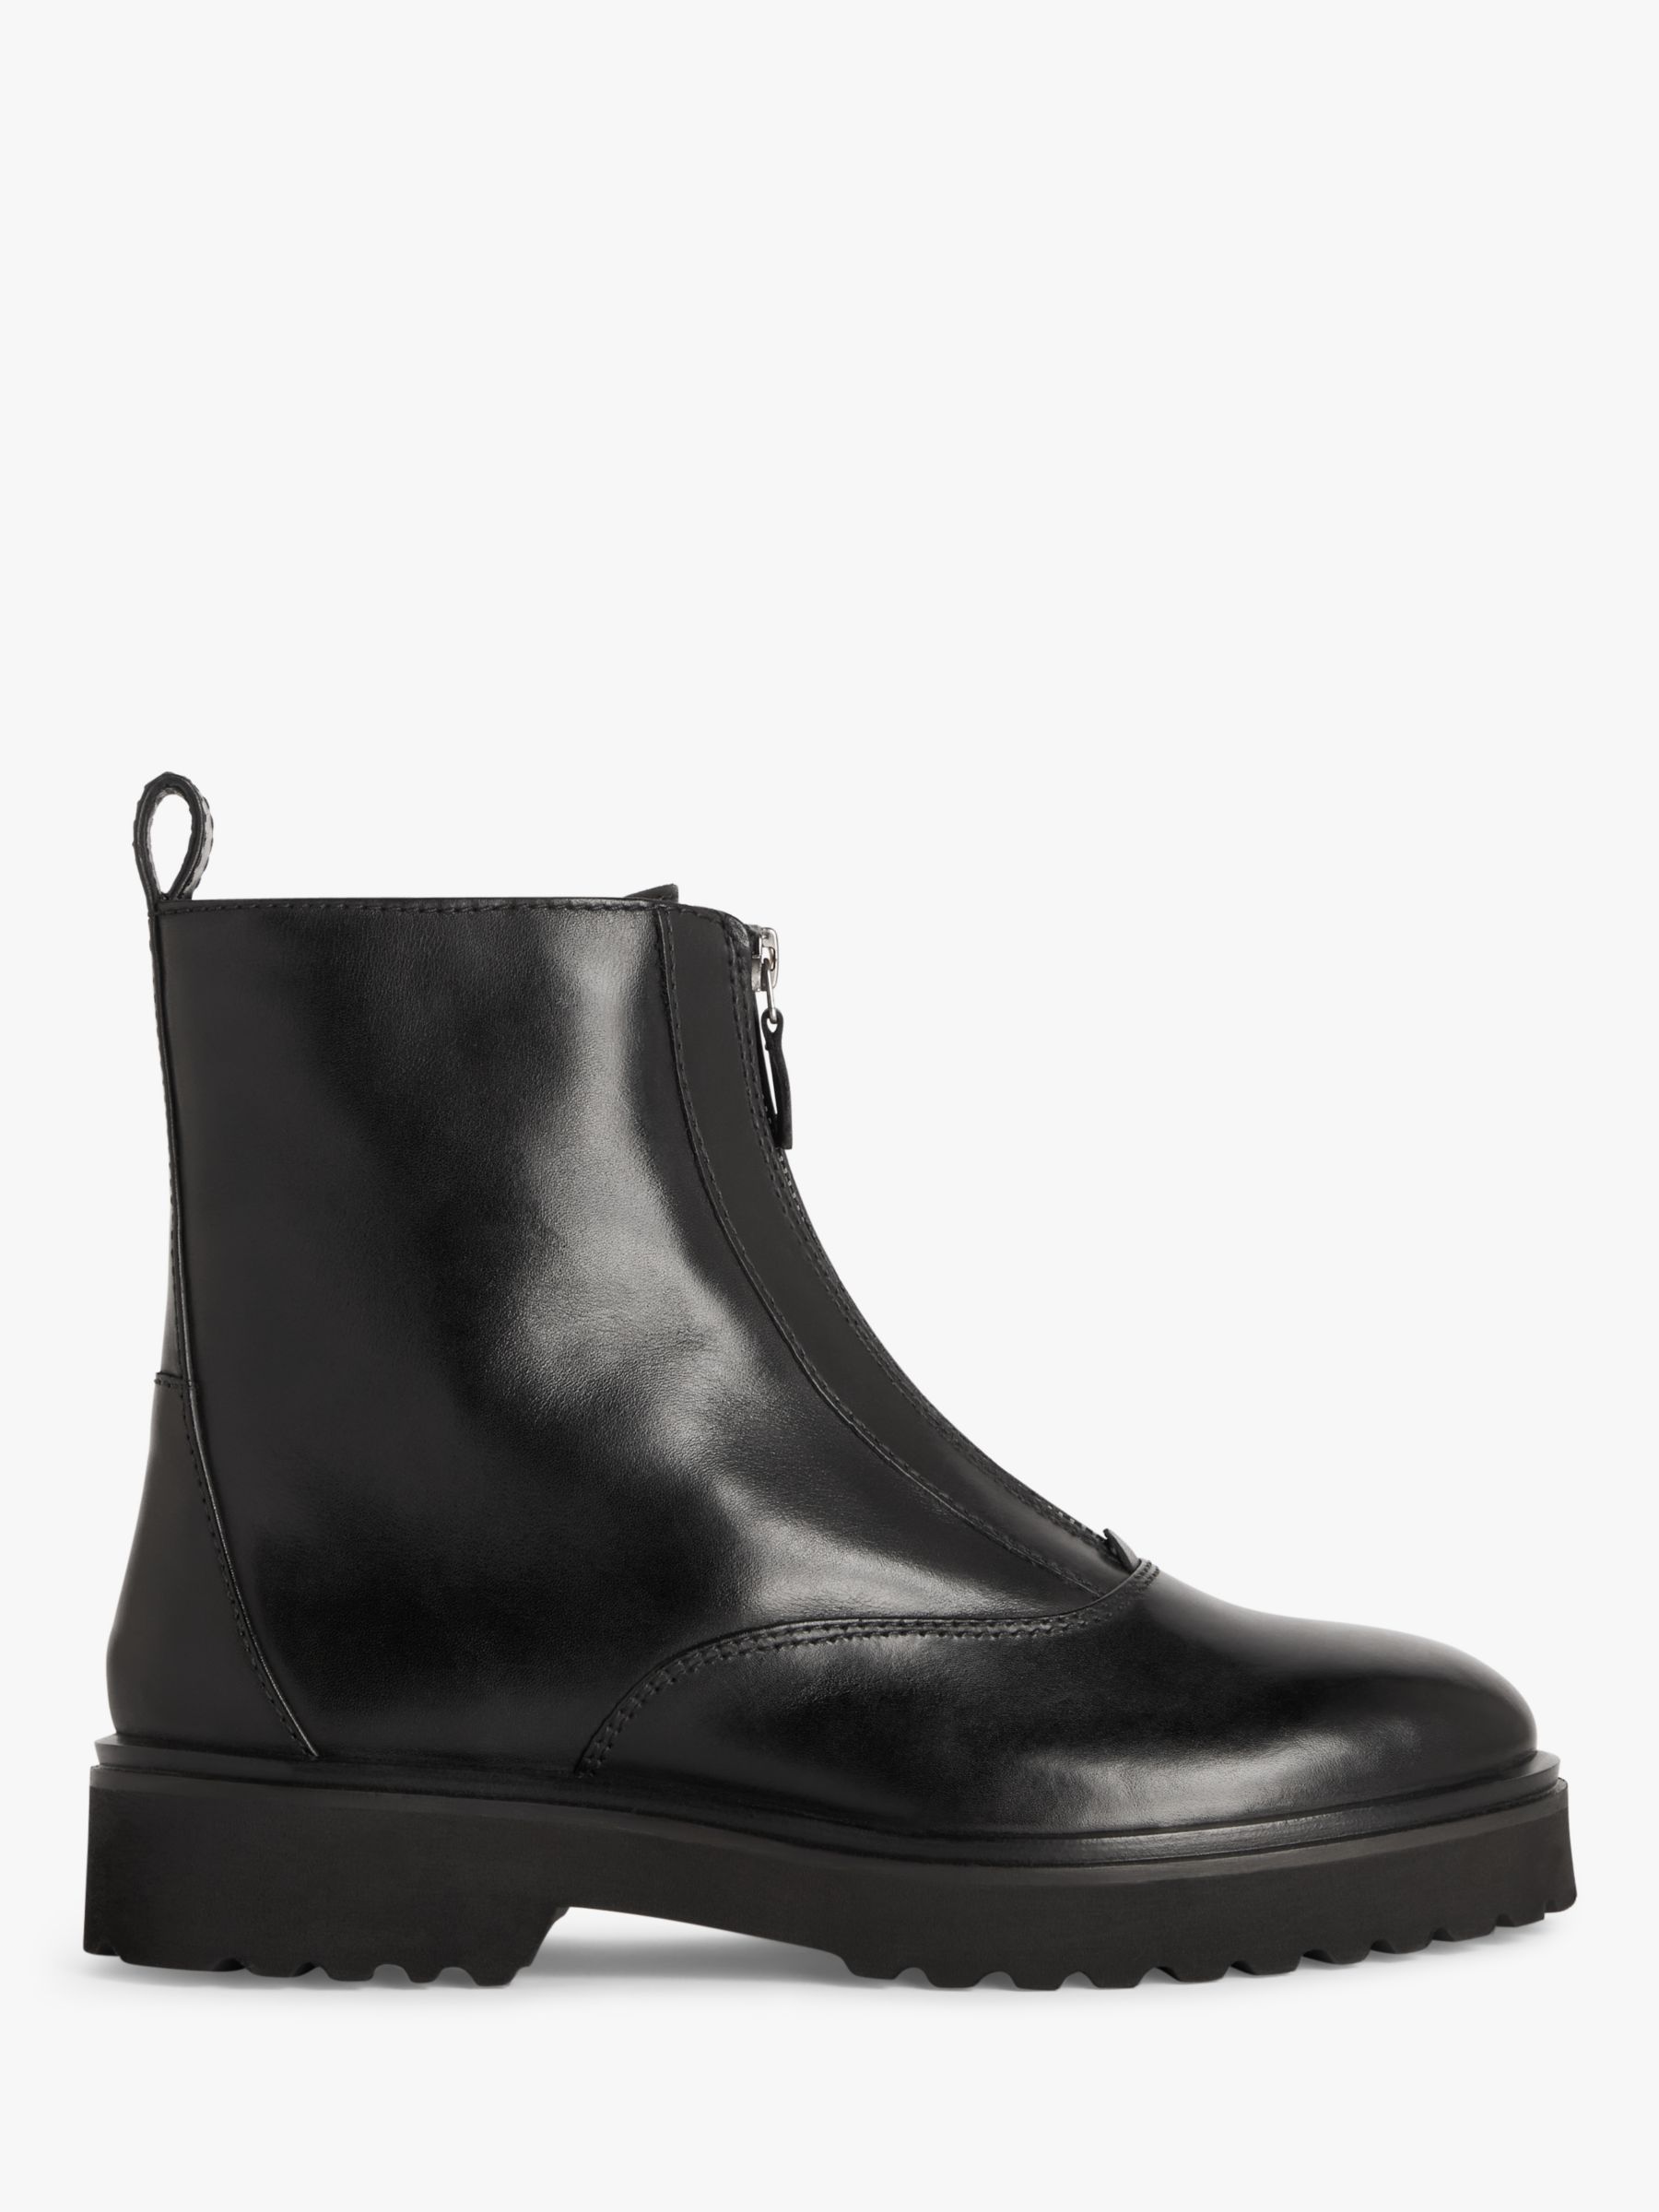 John Lewis ANYDAY Purdie Leather Zip Front Ankle Boots, Black at John ...